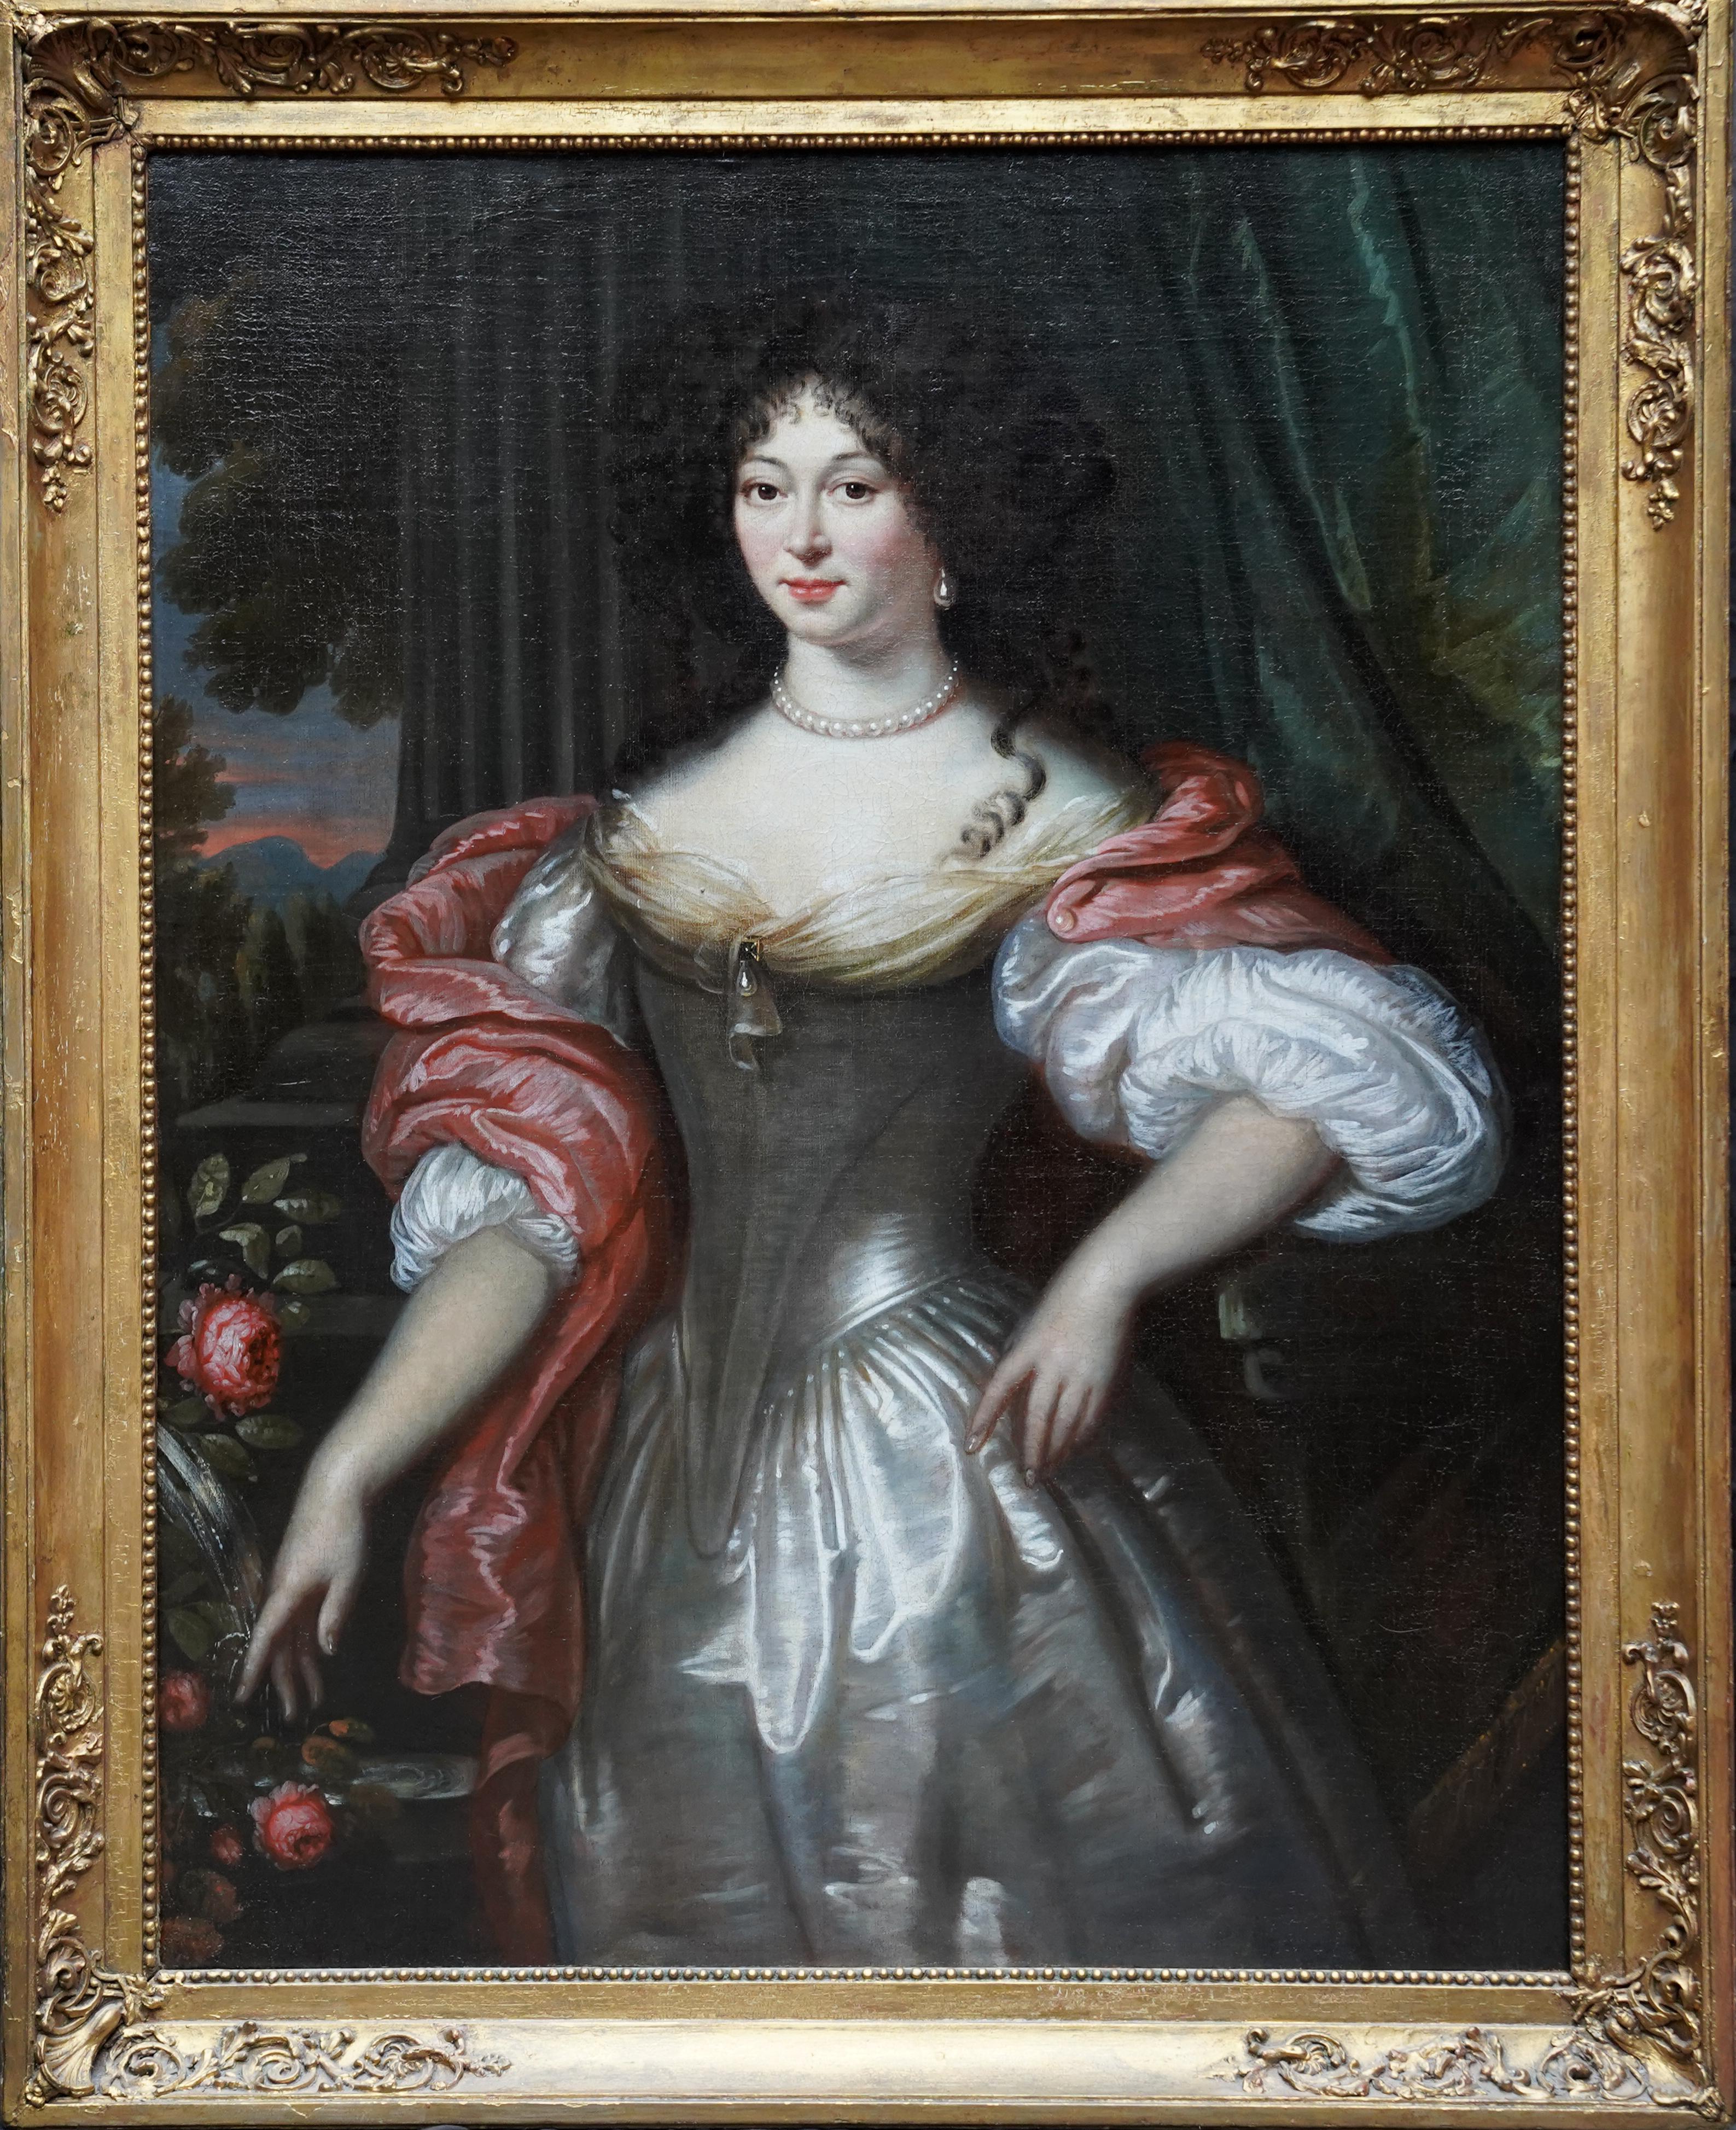 Willem Wissing Portrait Painting - Portrait of Lady in Silver Dress - Dutch Old Master art portrait oil painting